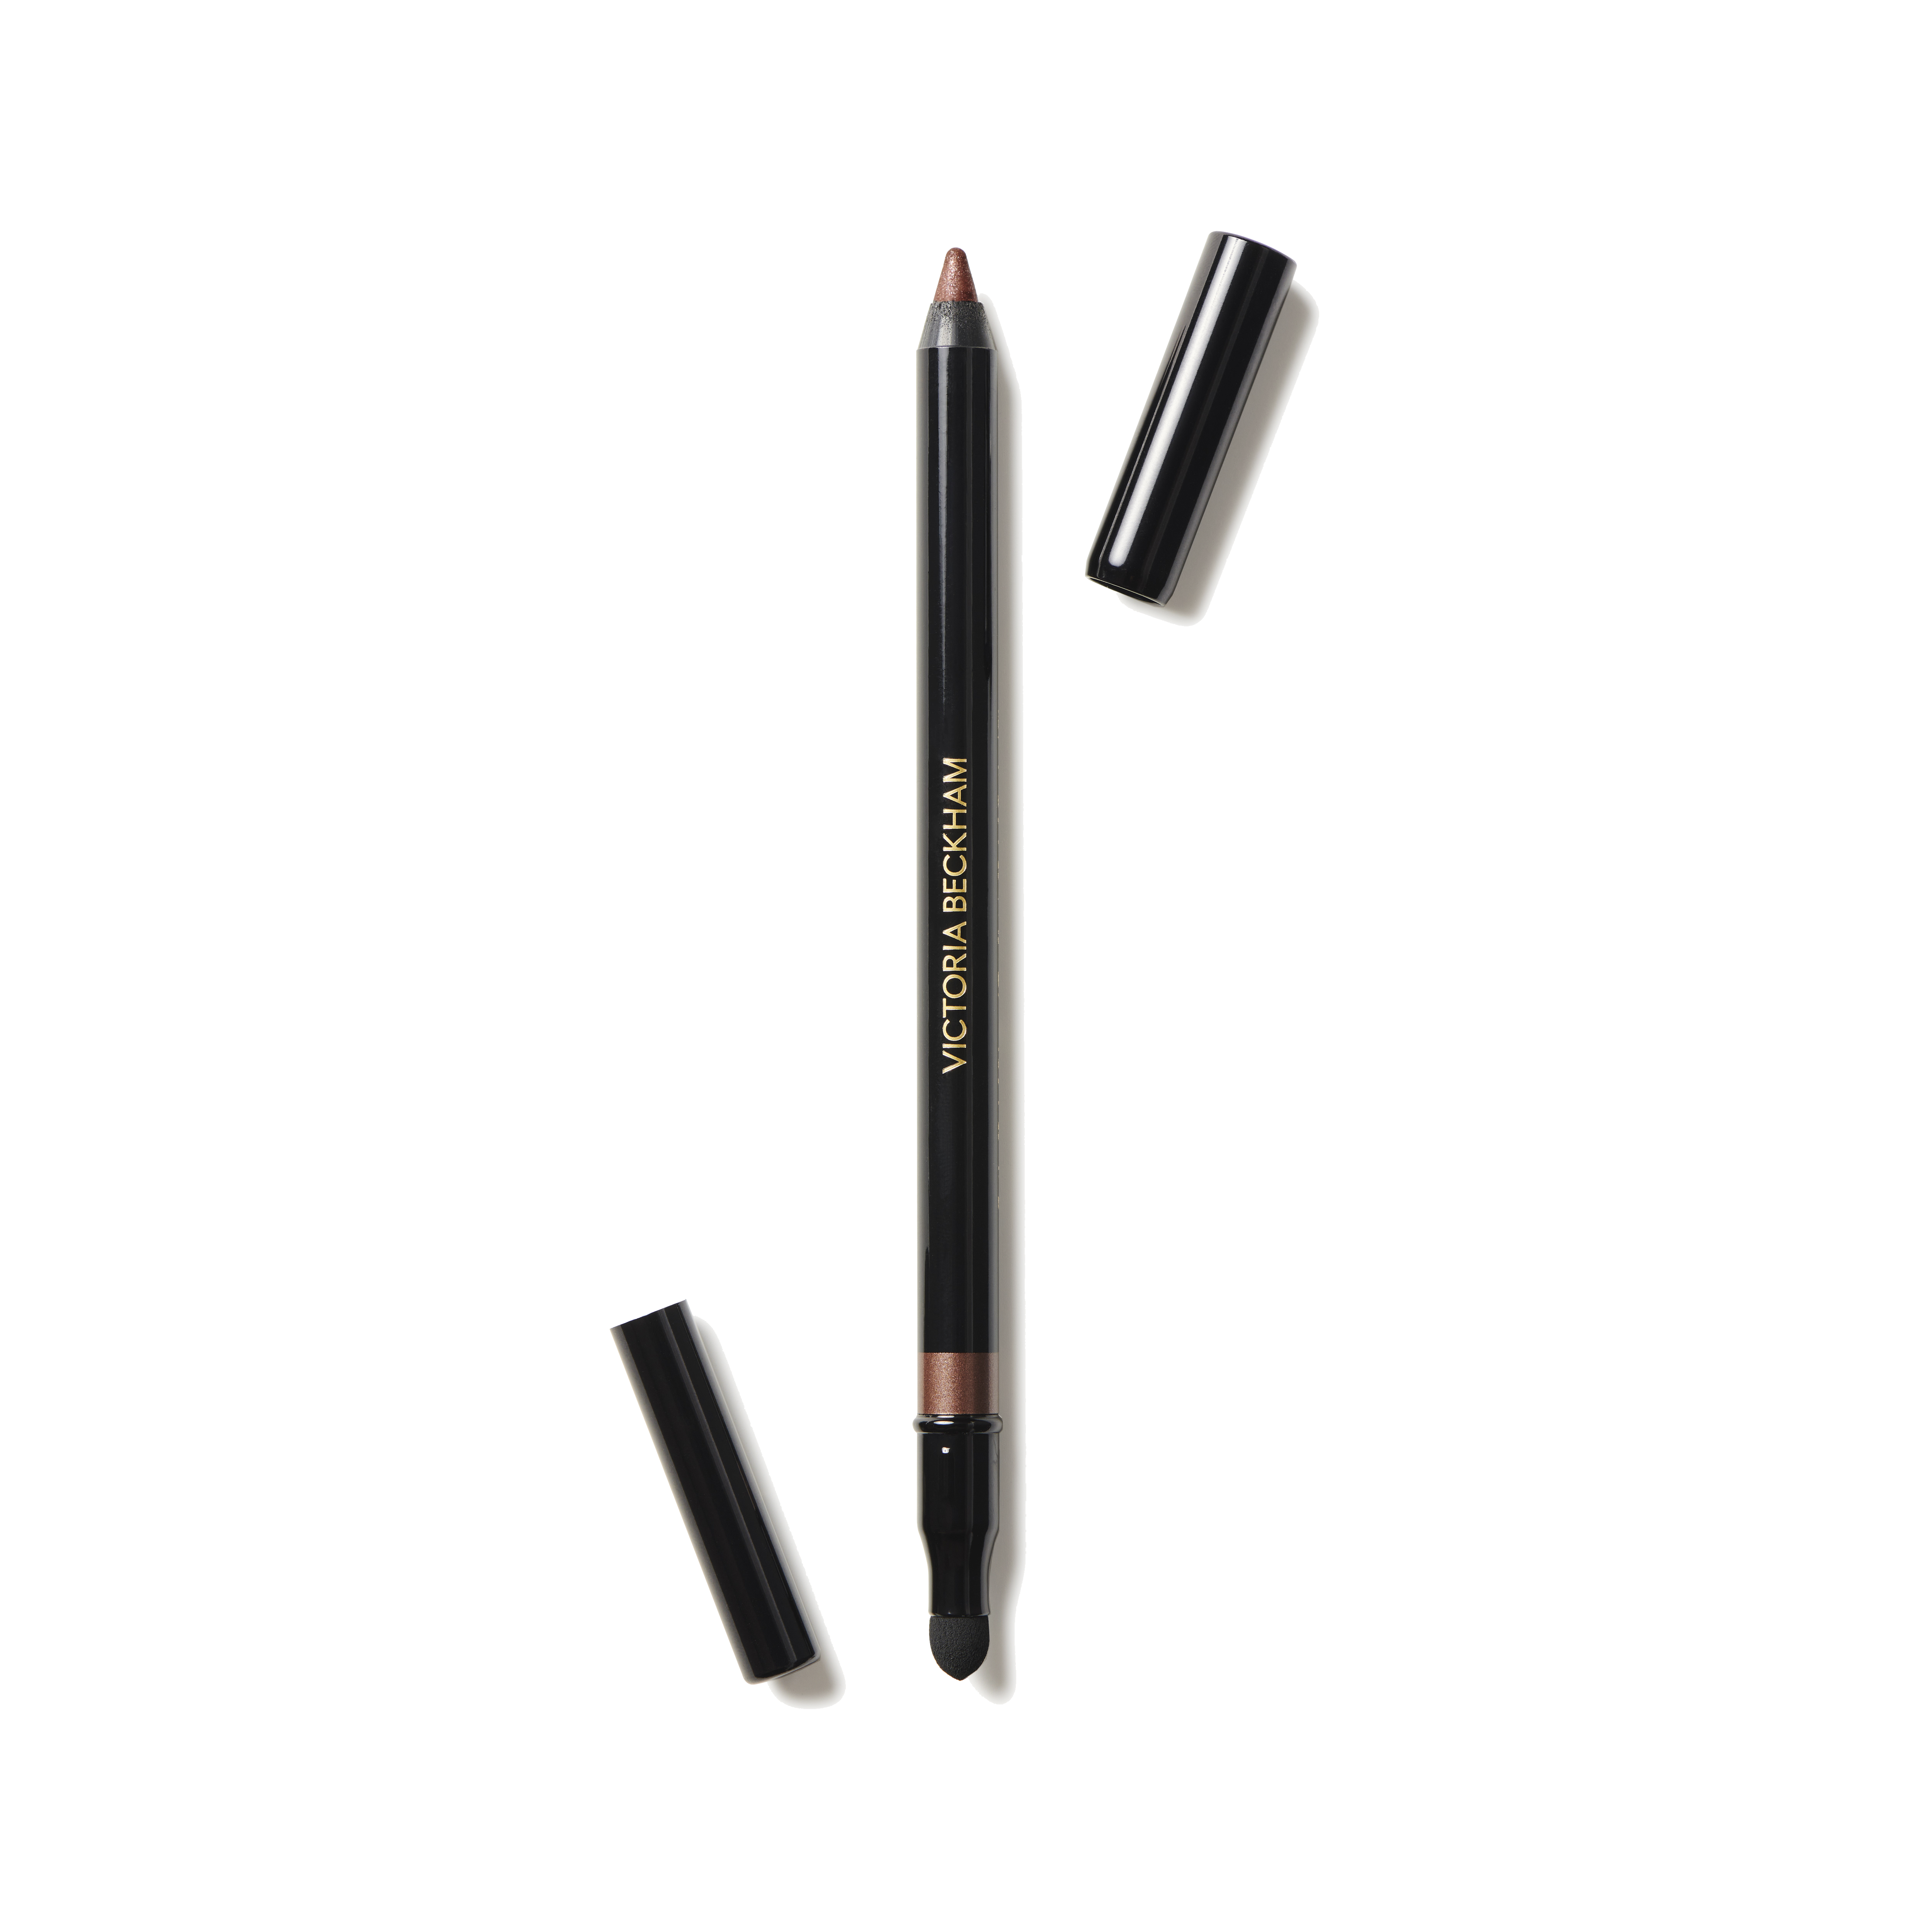 The 11 best eyeliner pencils we've tested for 2023: Review